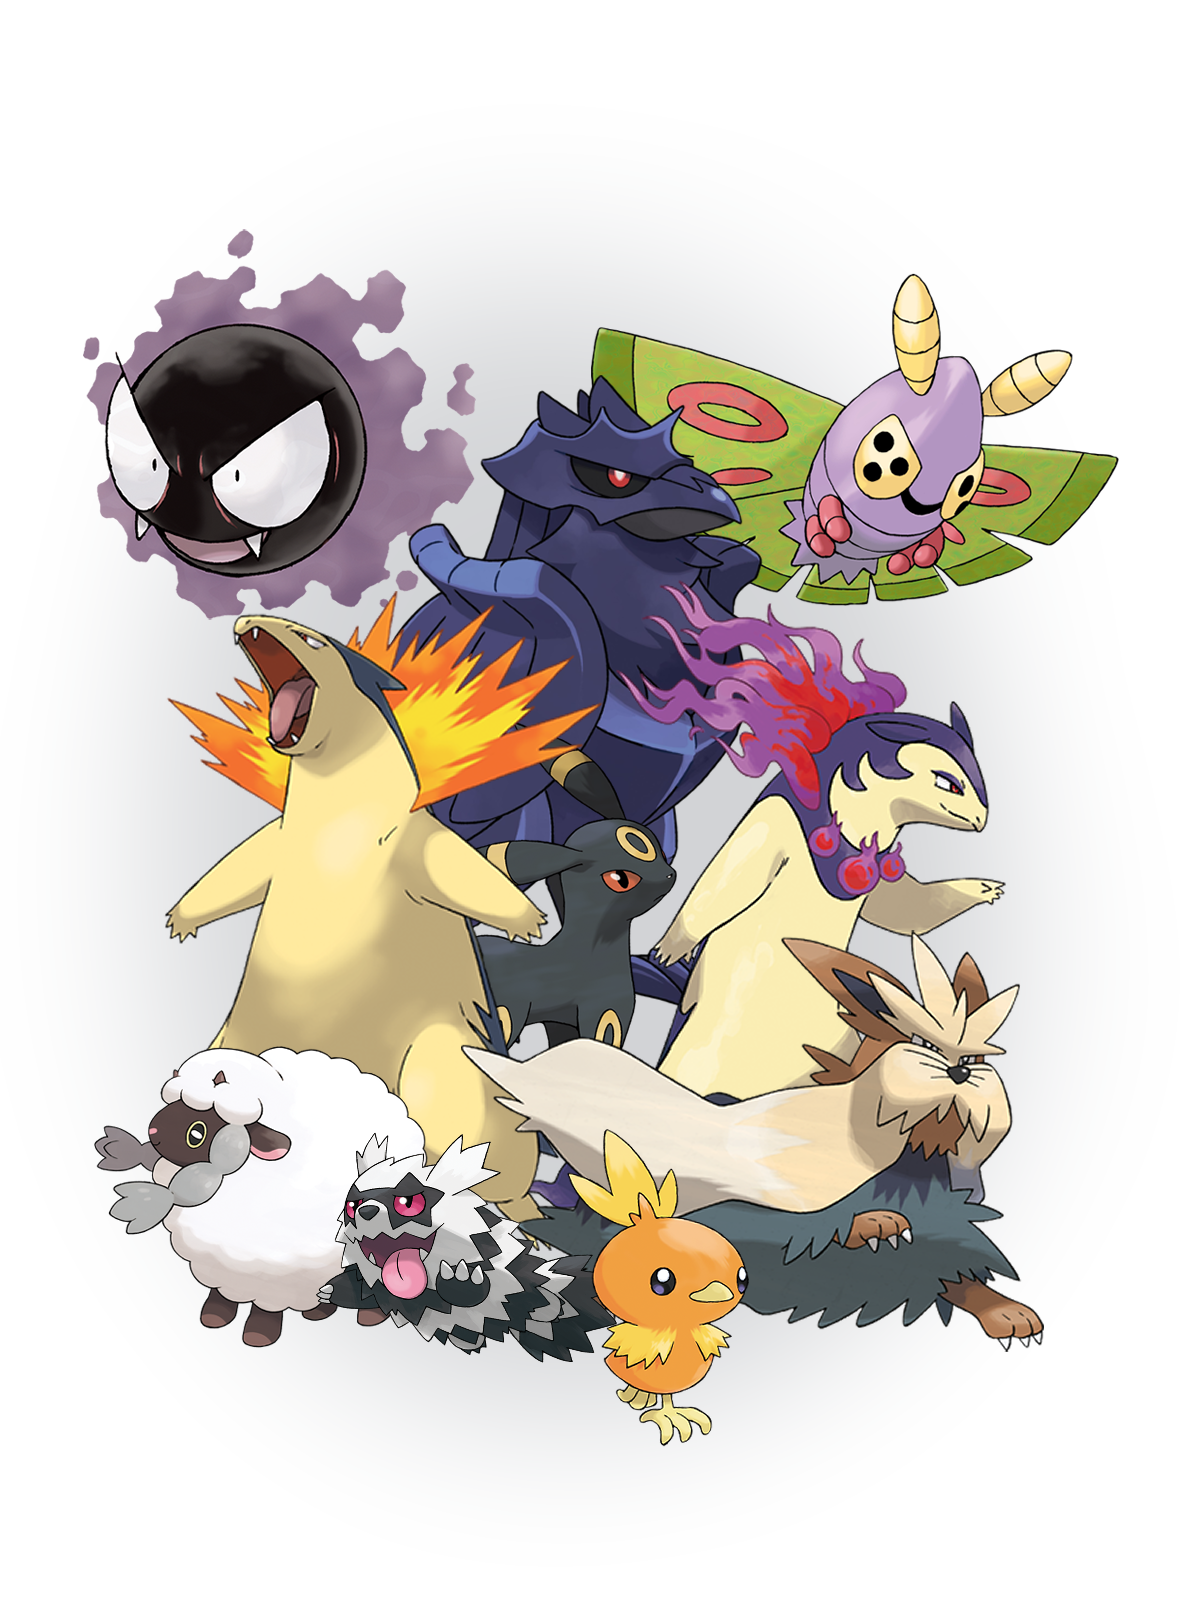 A digital collage of pokemon. It includes gastly, dustox, corviknight, typhlosion and typhlosion's hisuian form, umbreon, wooloo, stoutland, galarian zigzagoon and torchic.